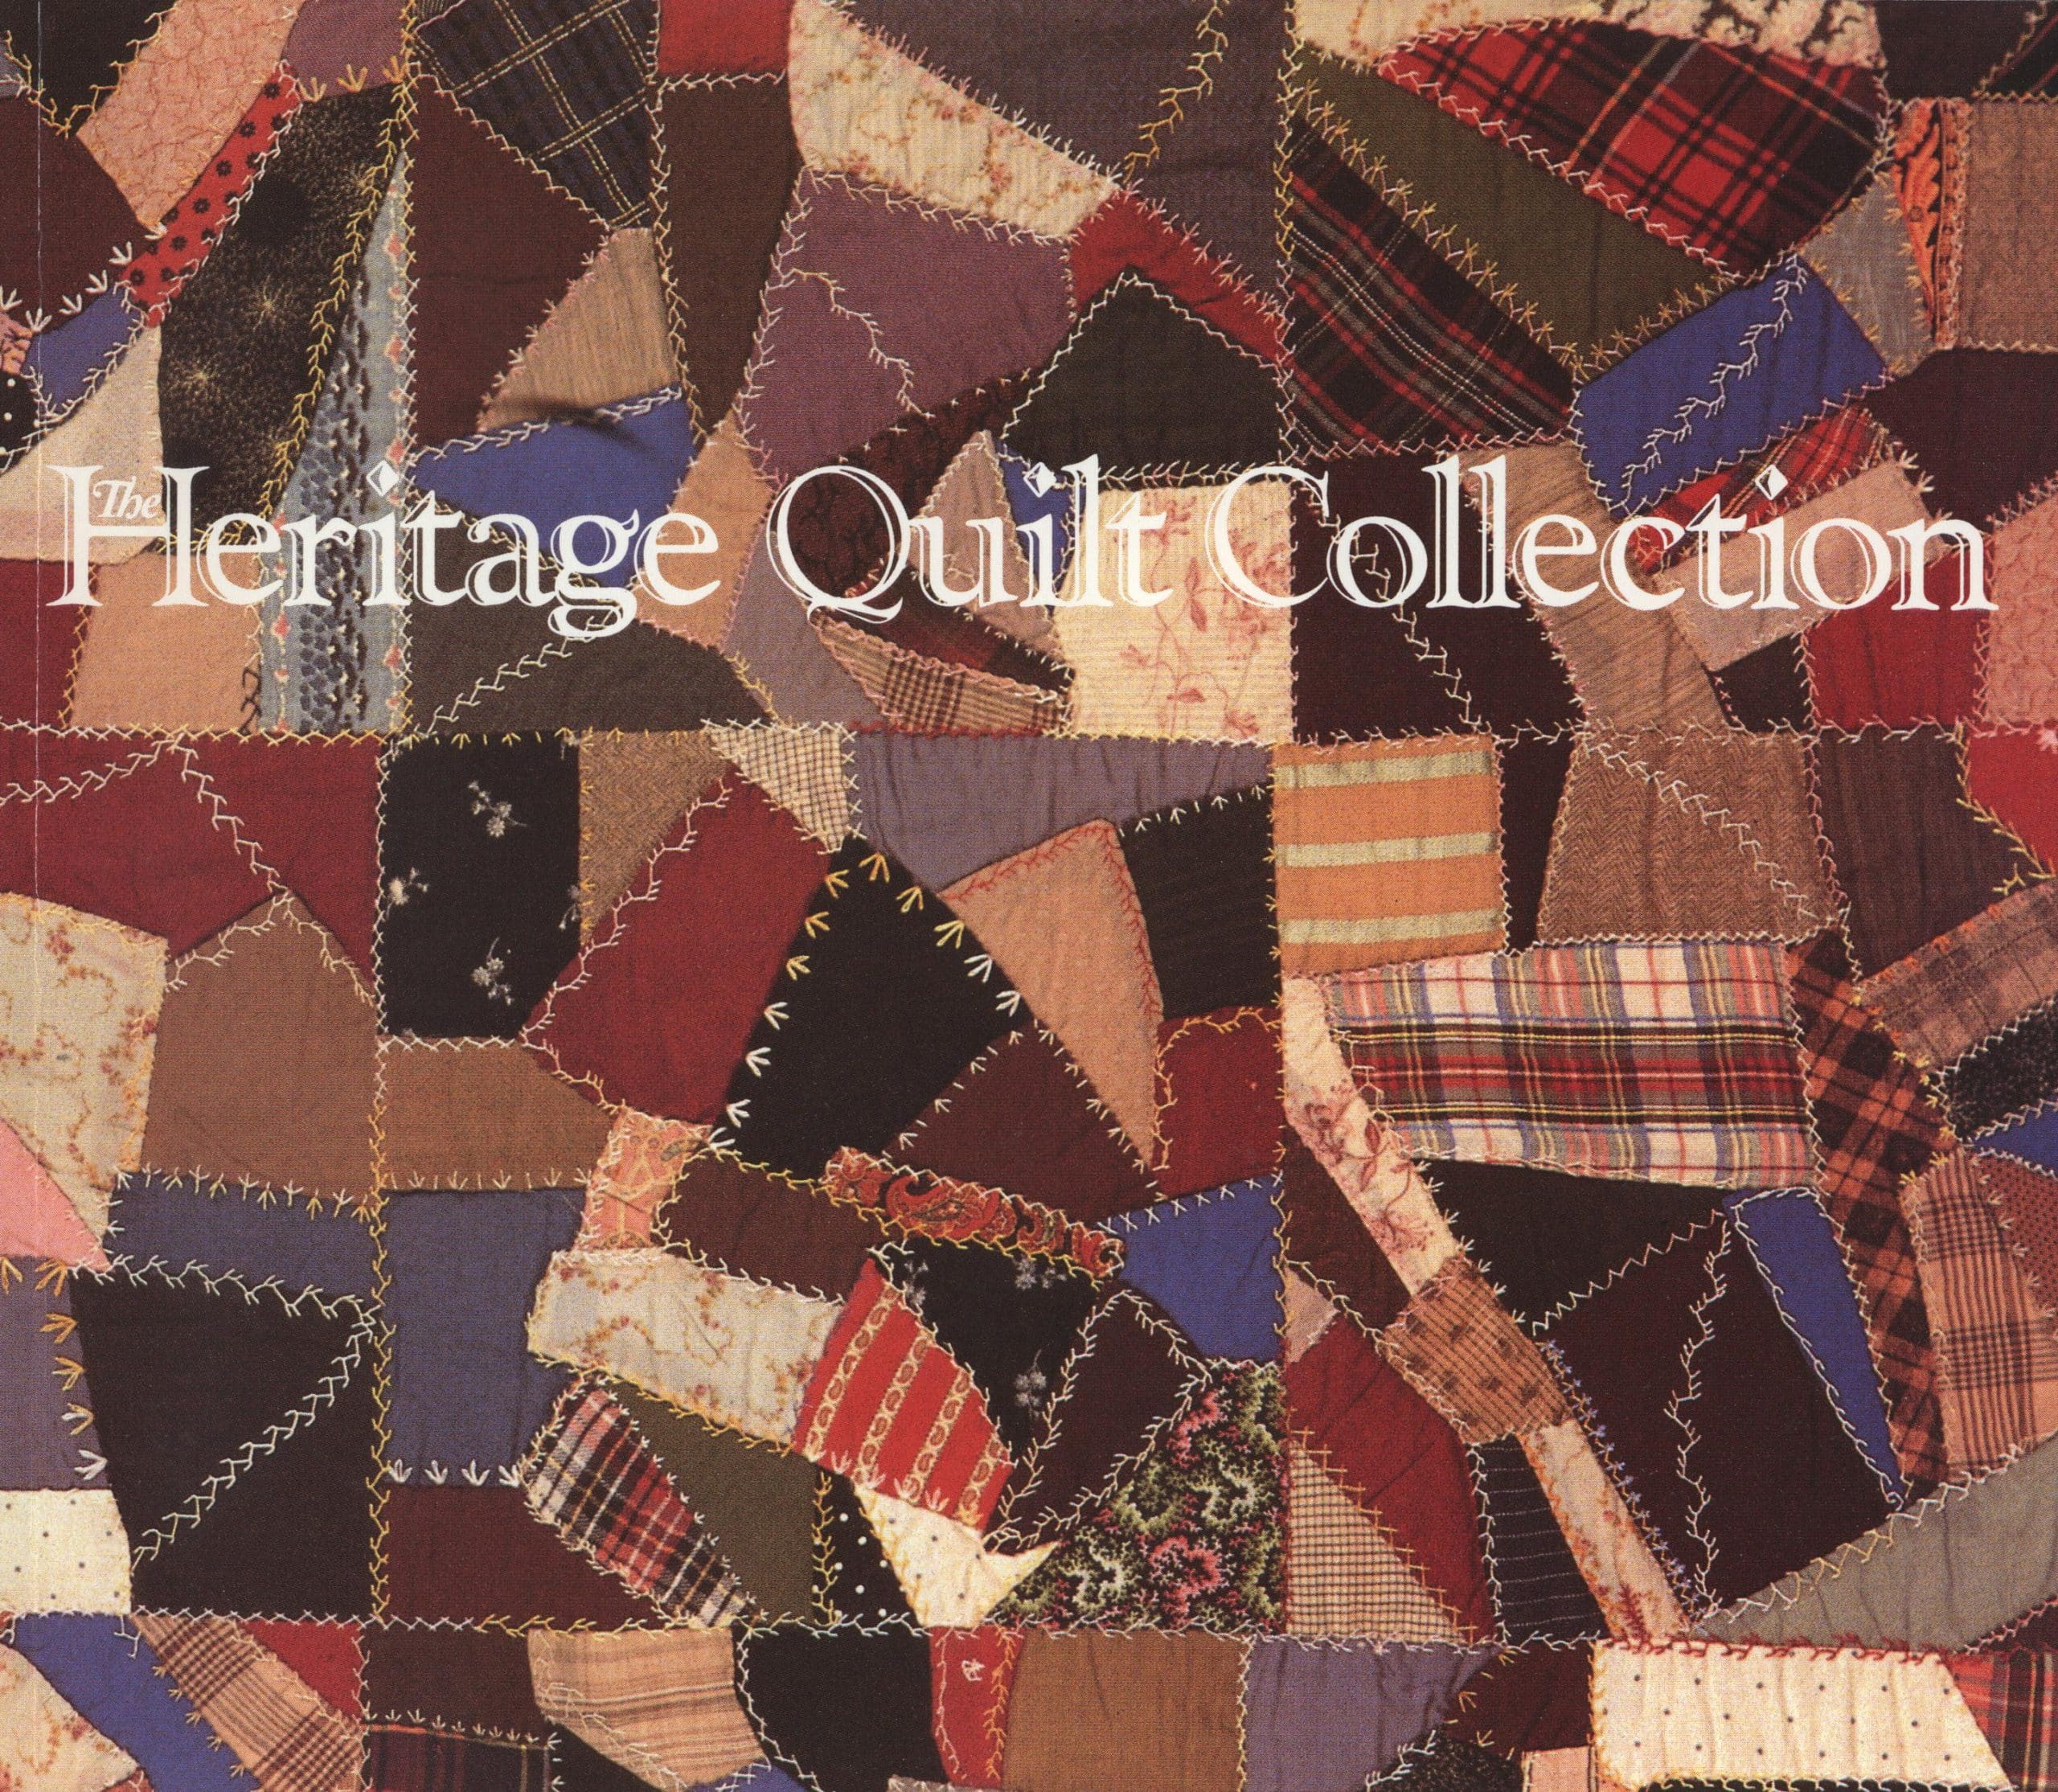 The Heritage Quilt Collection